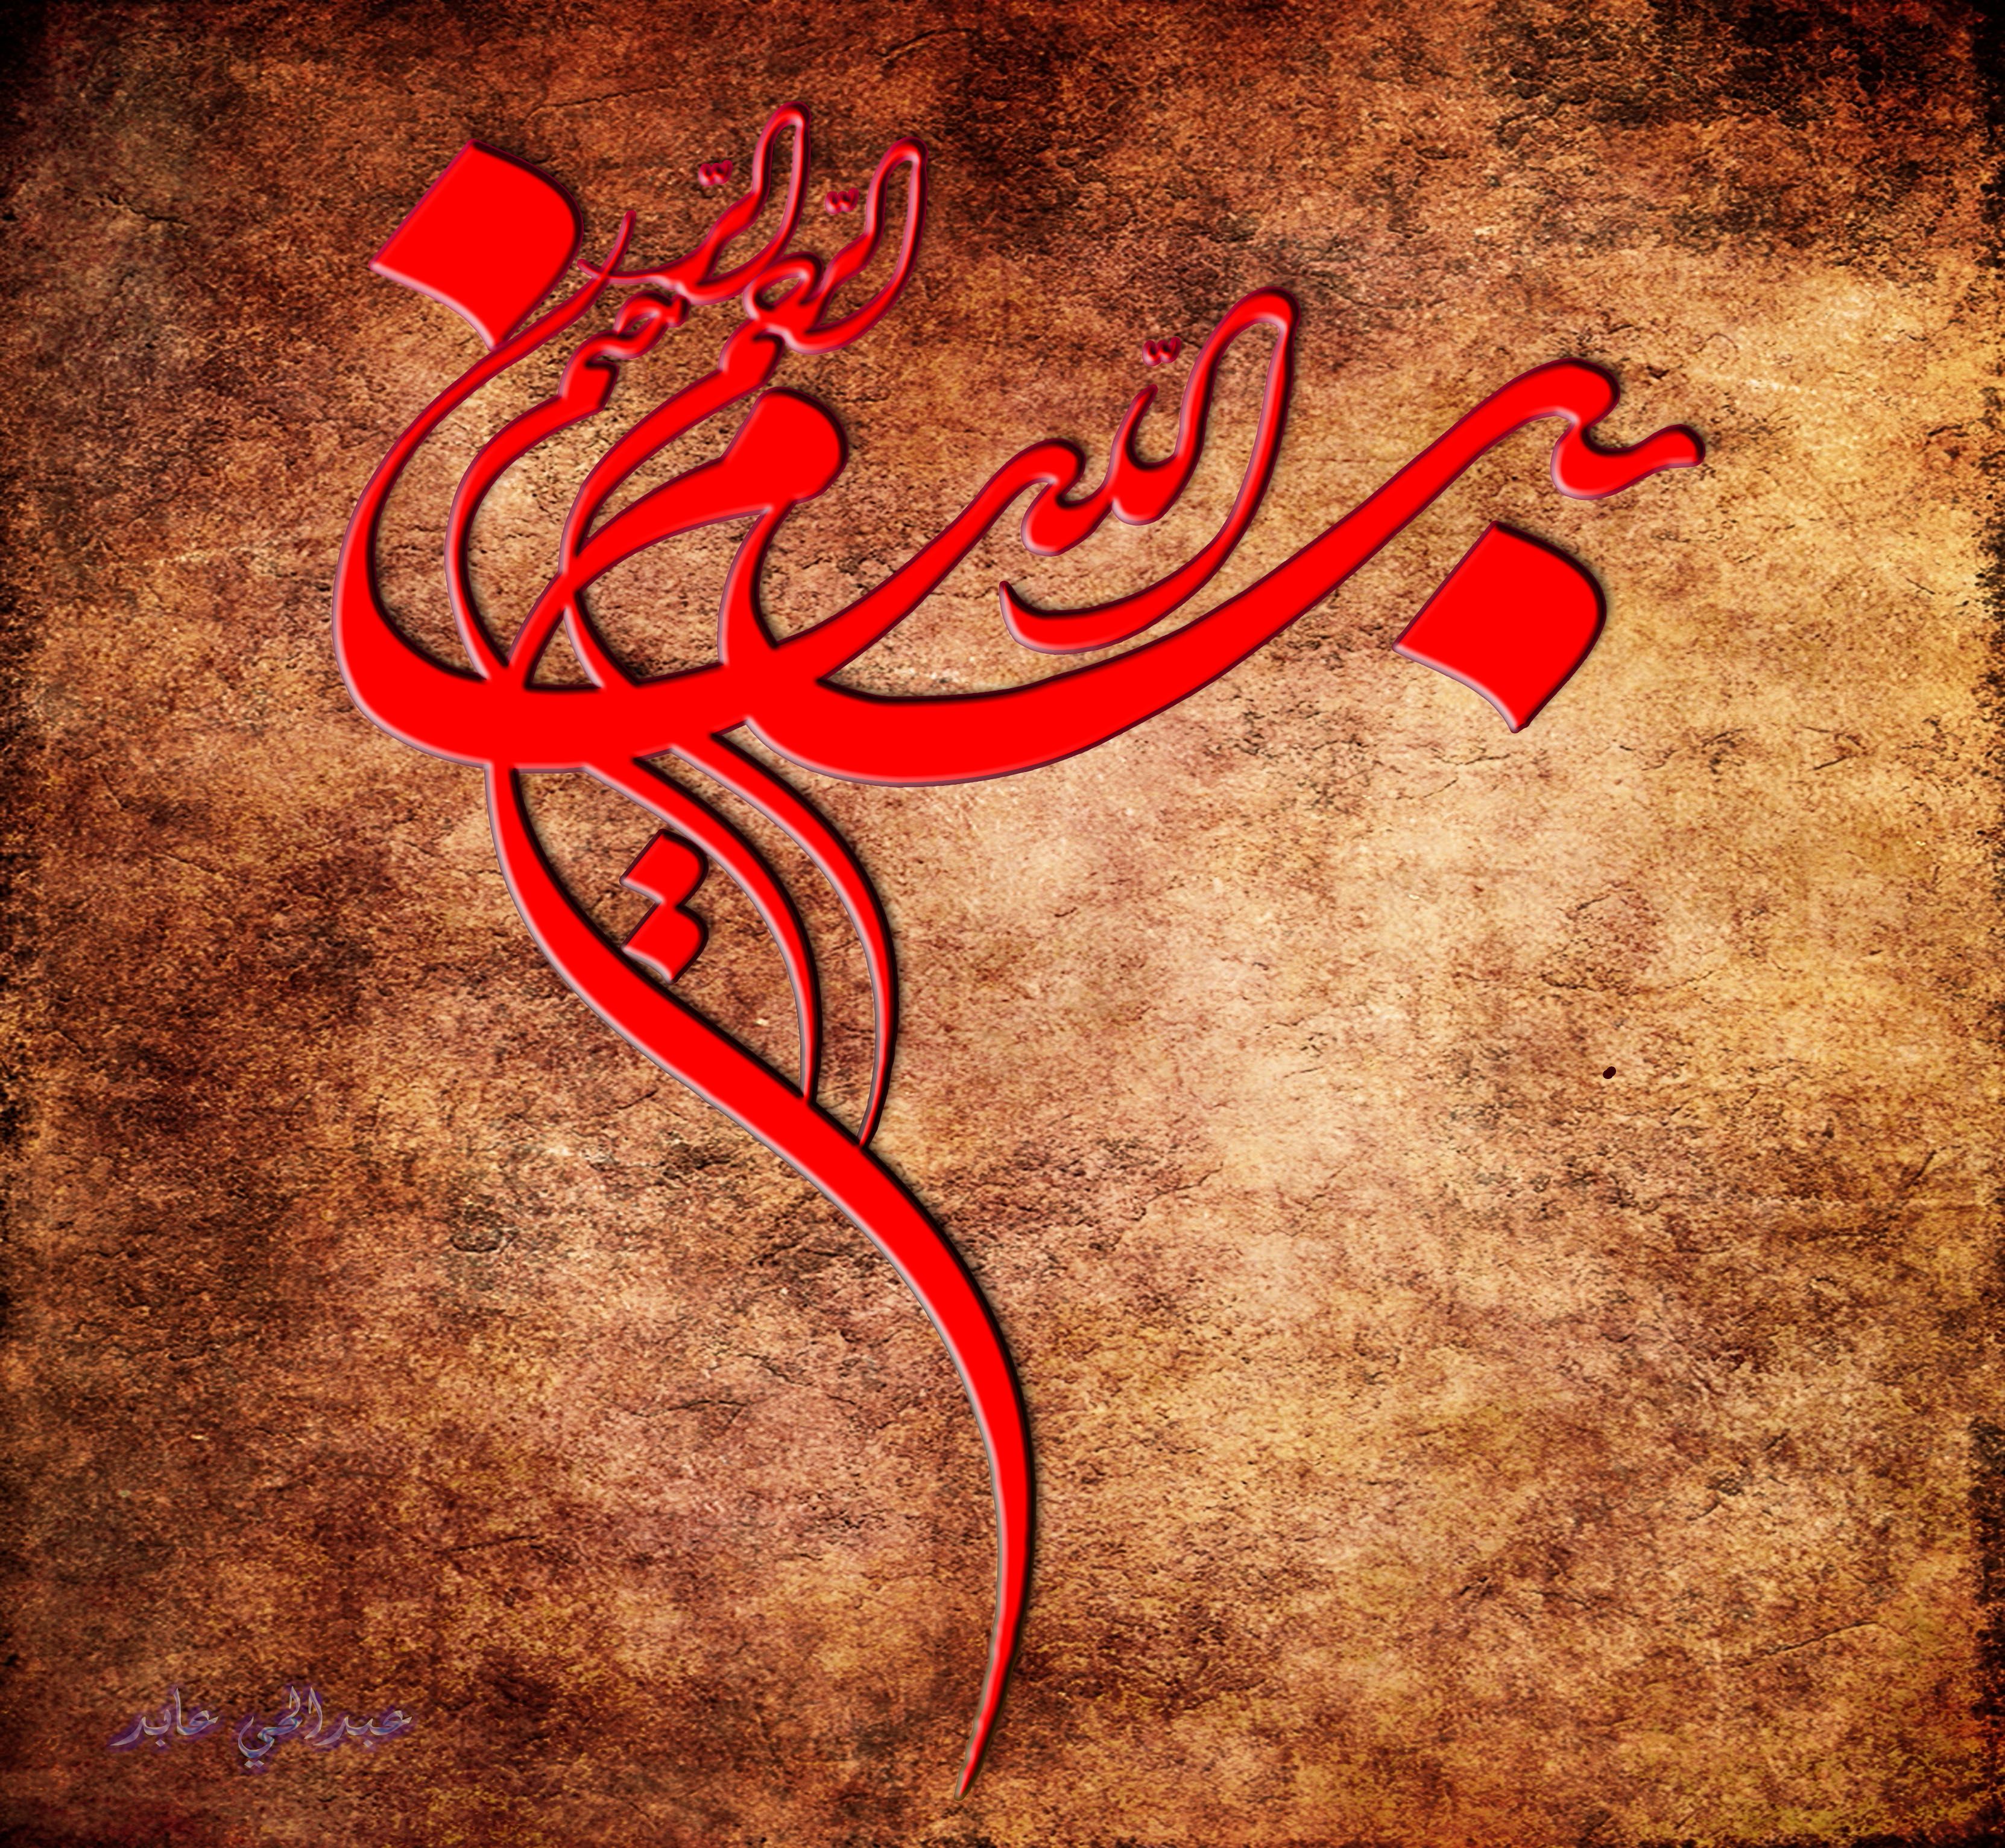 Islamic Art Calligraphy And Architecture Designs Patterns